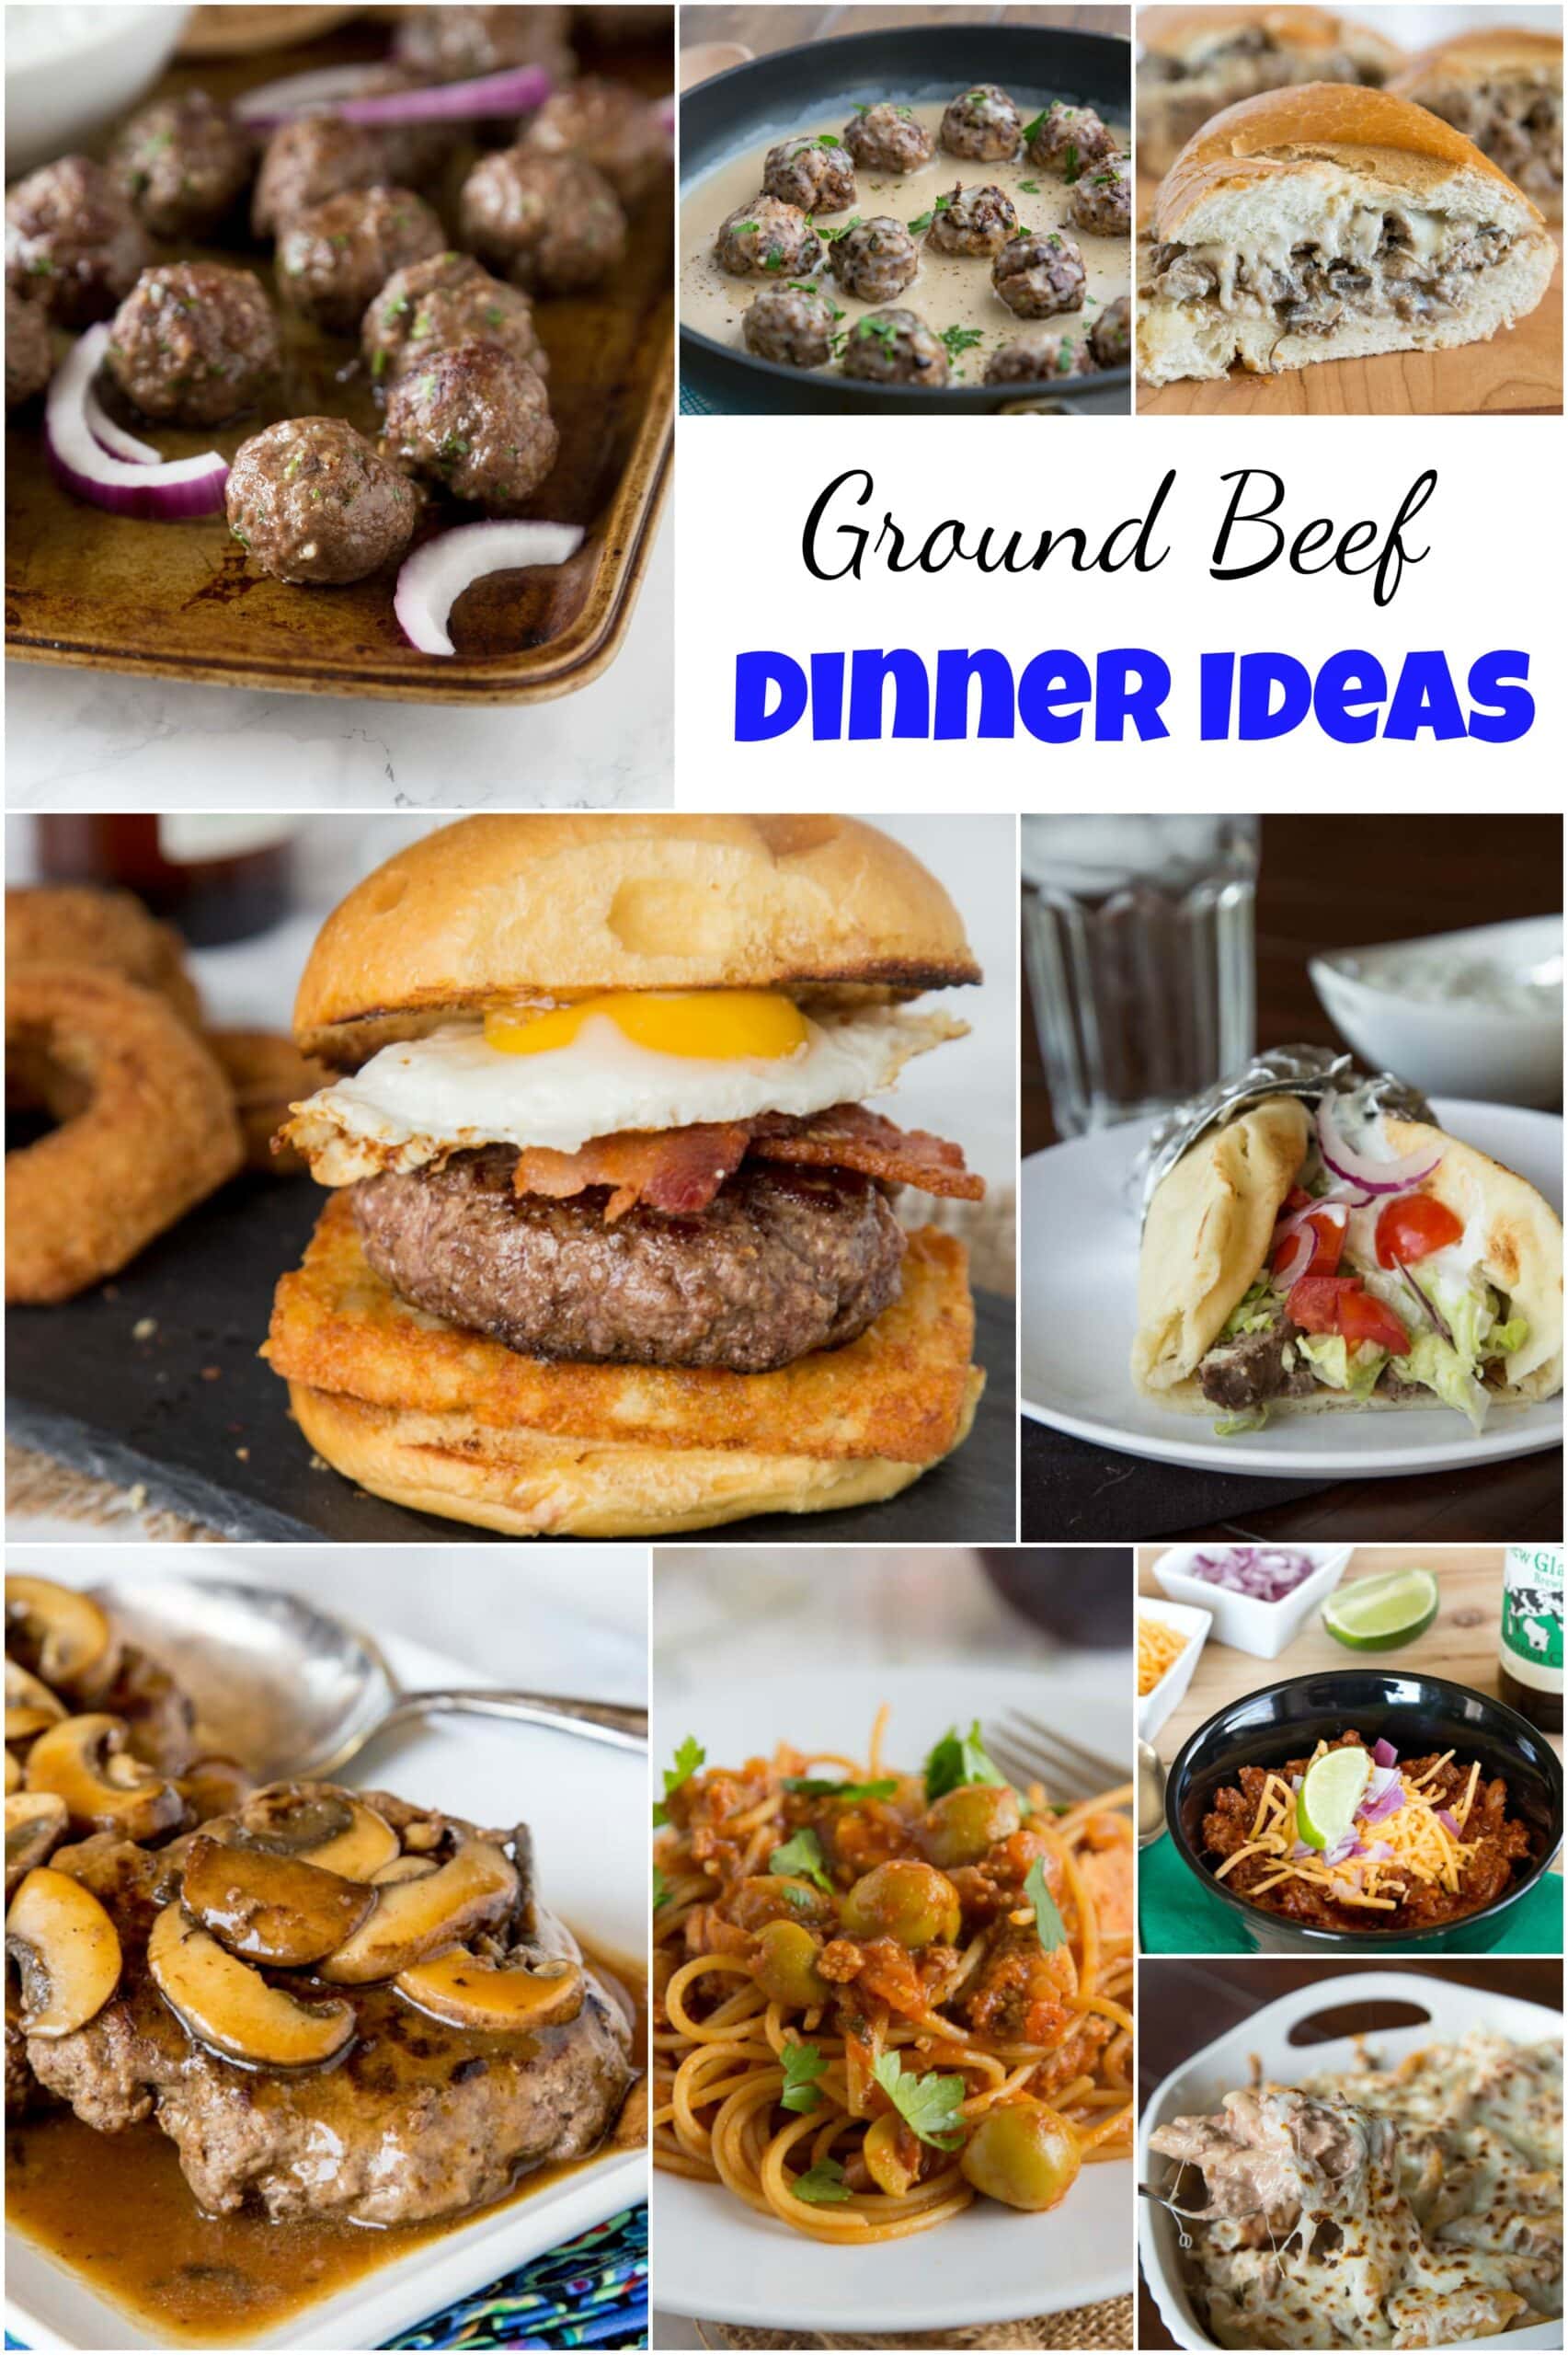 Ground Beef Dinner Ideas - Have a ground beef, and wondering what to make with it?  Here are 25 of my favorite ground beef dinner ideas. More than just tacos or meatloaf!